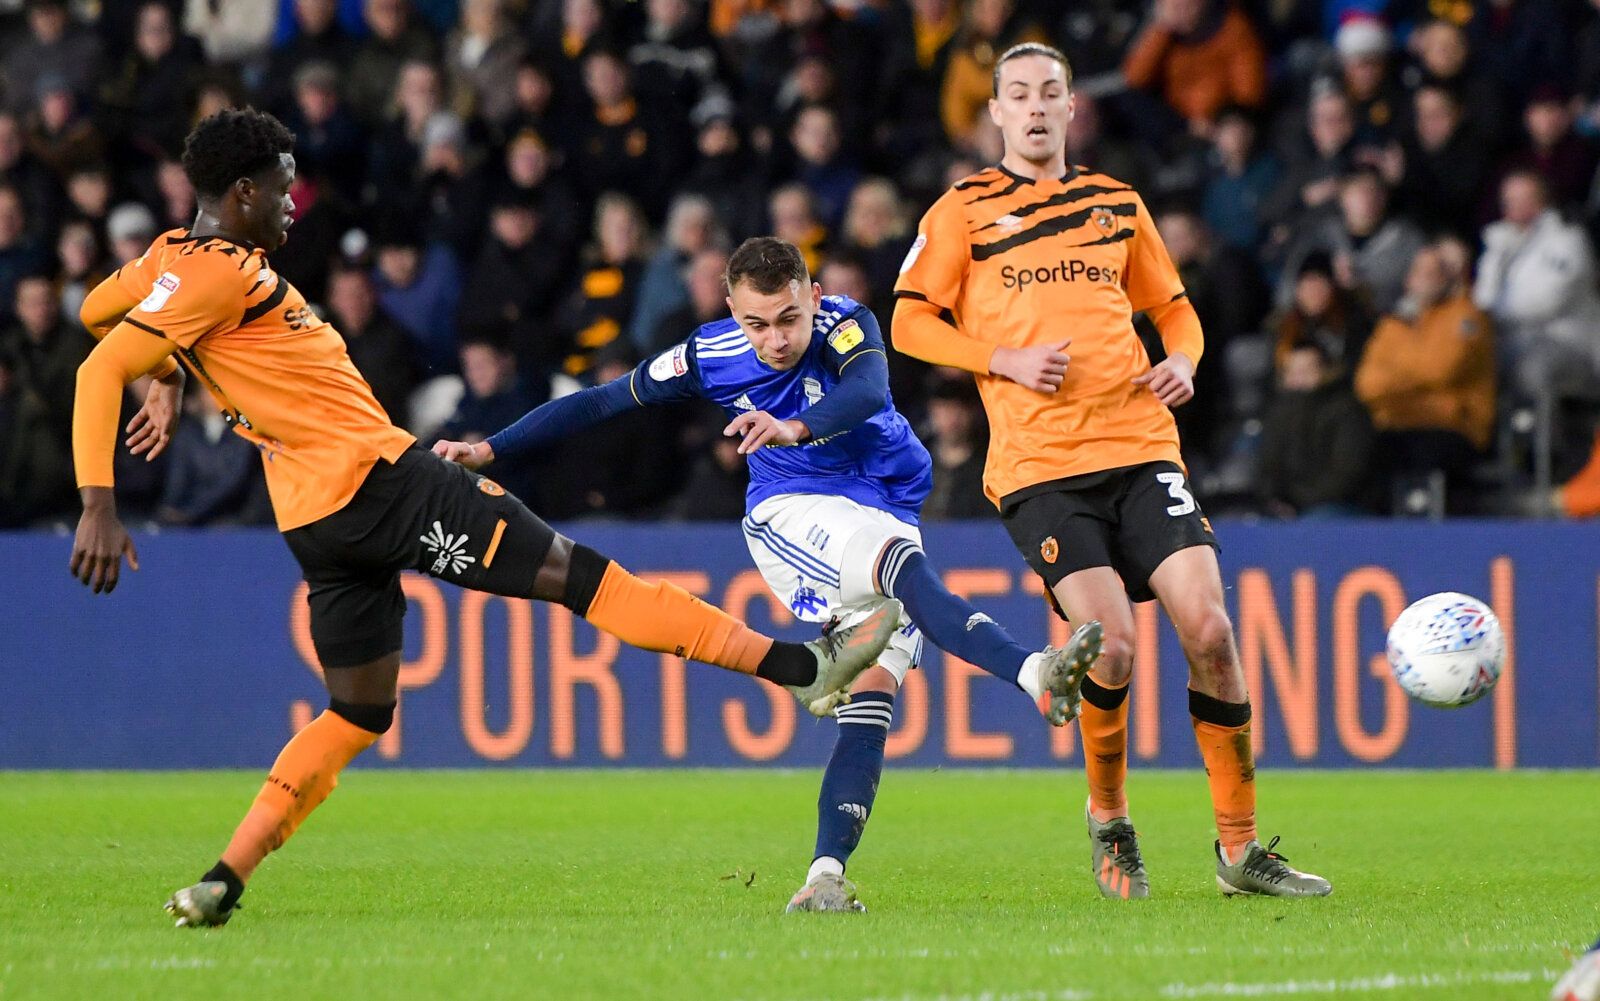 Soccer Football - Championship - Hull City v Birmingham City - KCOM Stadium, Hull, Britain - December 21, 2019   Birmingham City's Fran Villalba shoots at goal    Action Images/Paul Burrows    EDITORIAL USE ONLY. No use with unauthorized audio, video, data, fixture lists, club/league logos or 